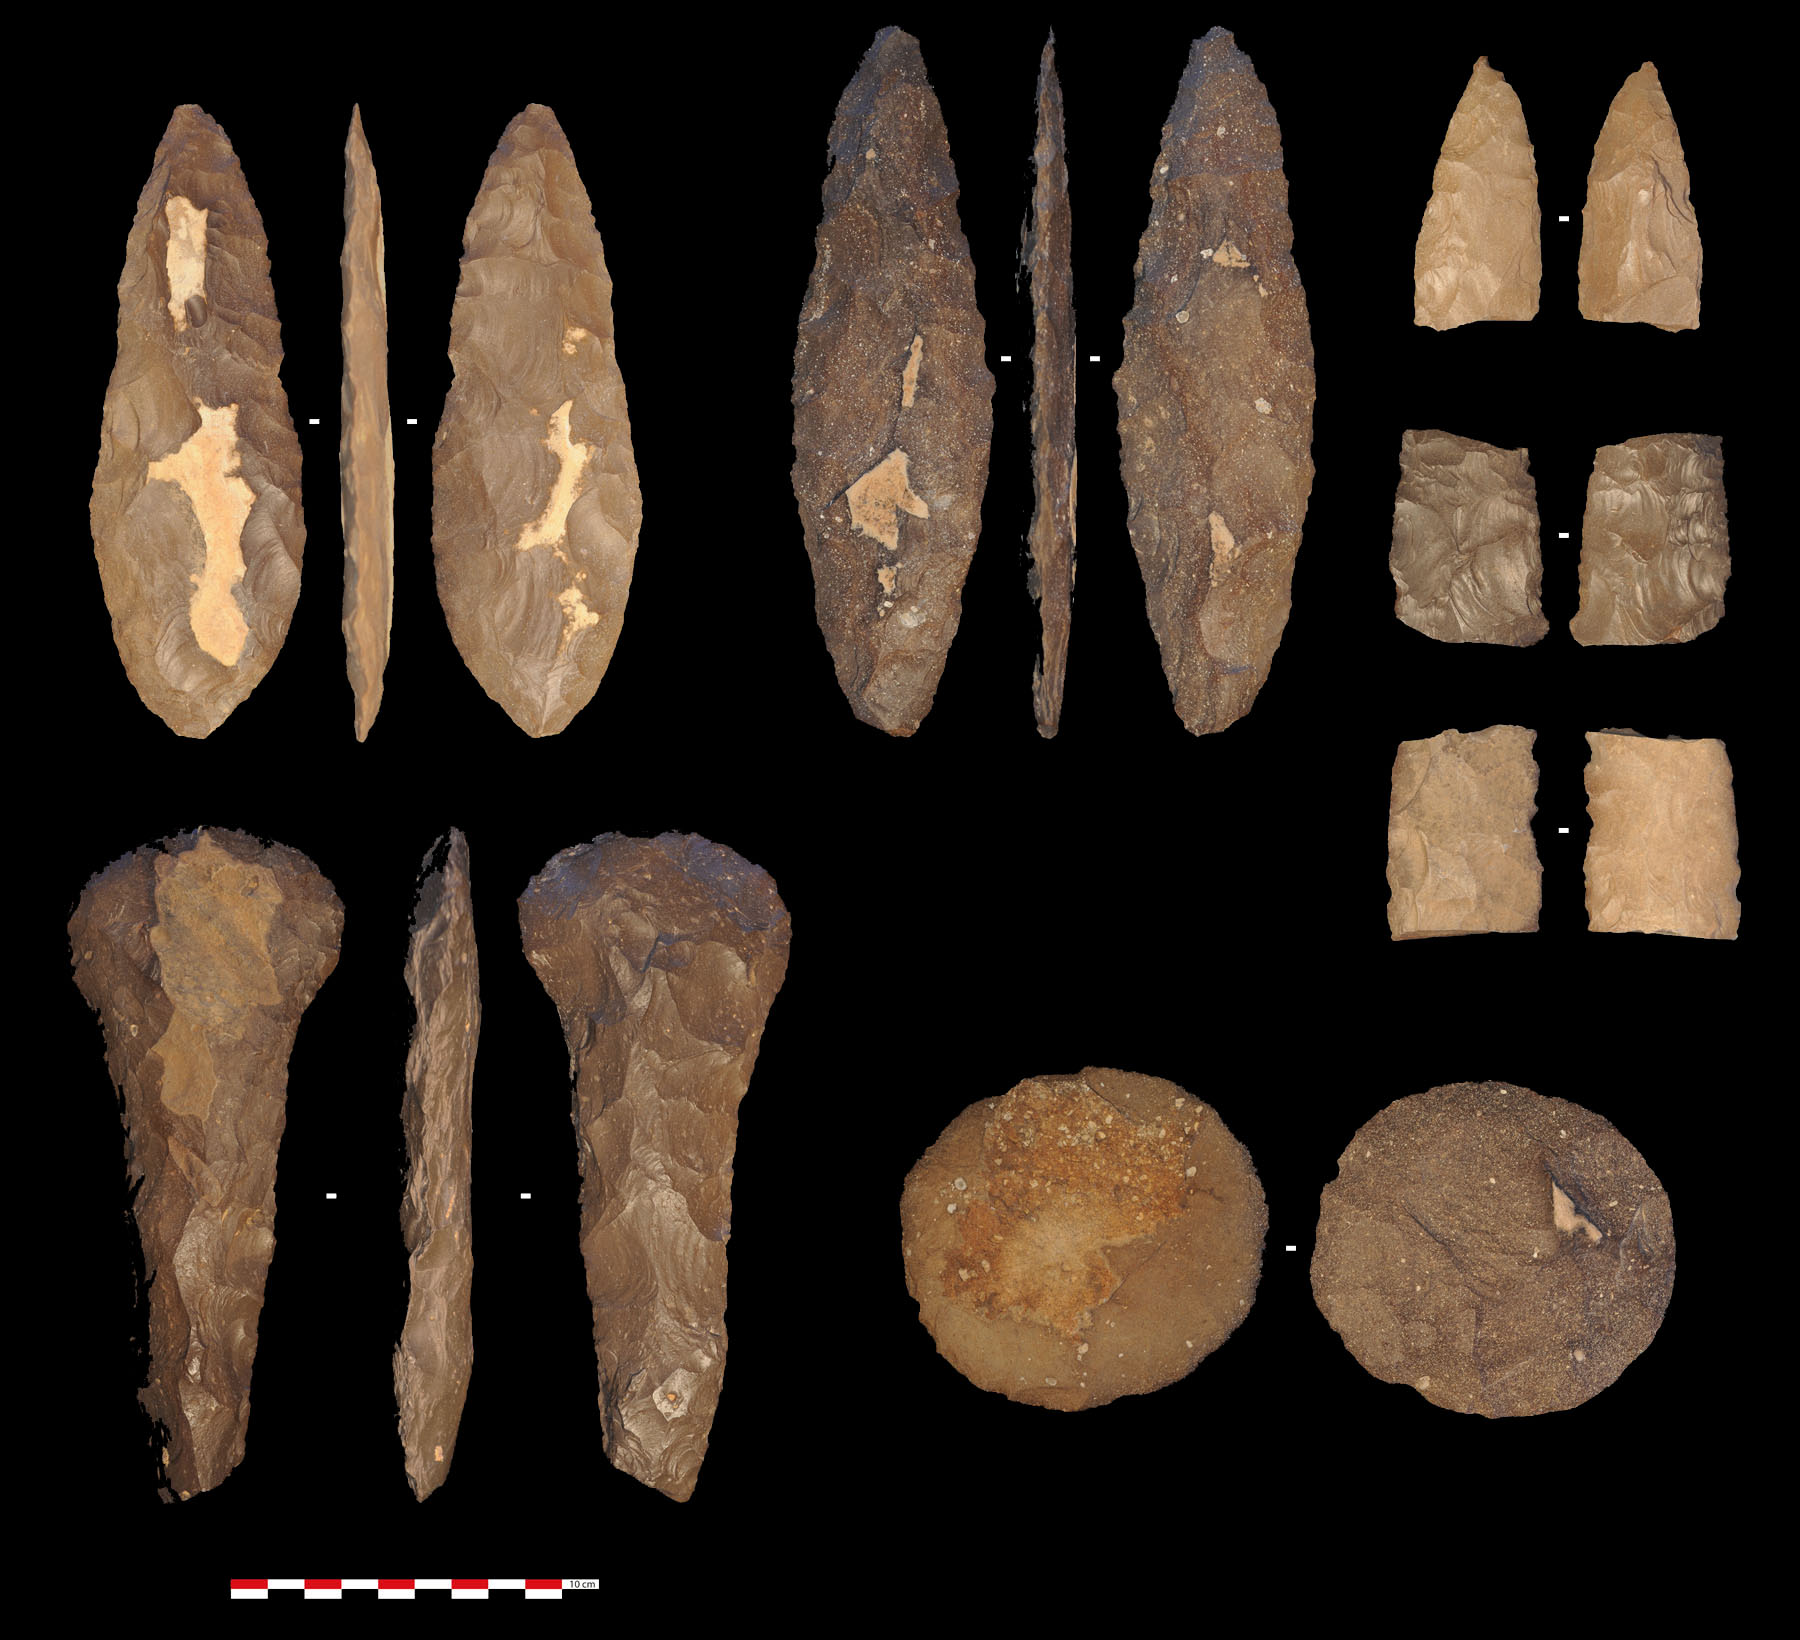 Fig. 19. Bifacial tools recovered from a flint workshop in the area of Jibal al-Khashabiyeh (courtesy Southeastern Badia Archaeological Project).